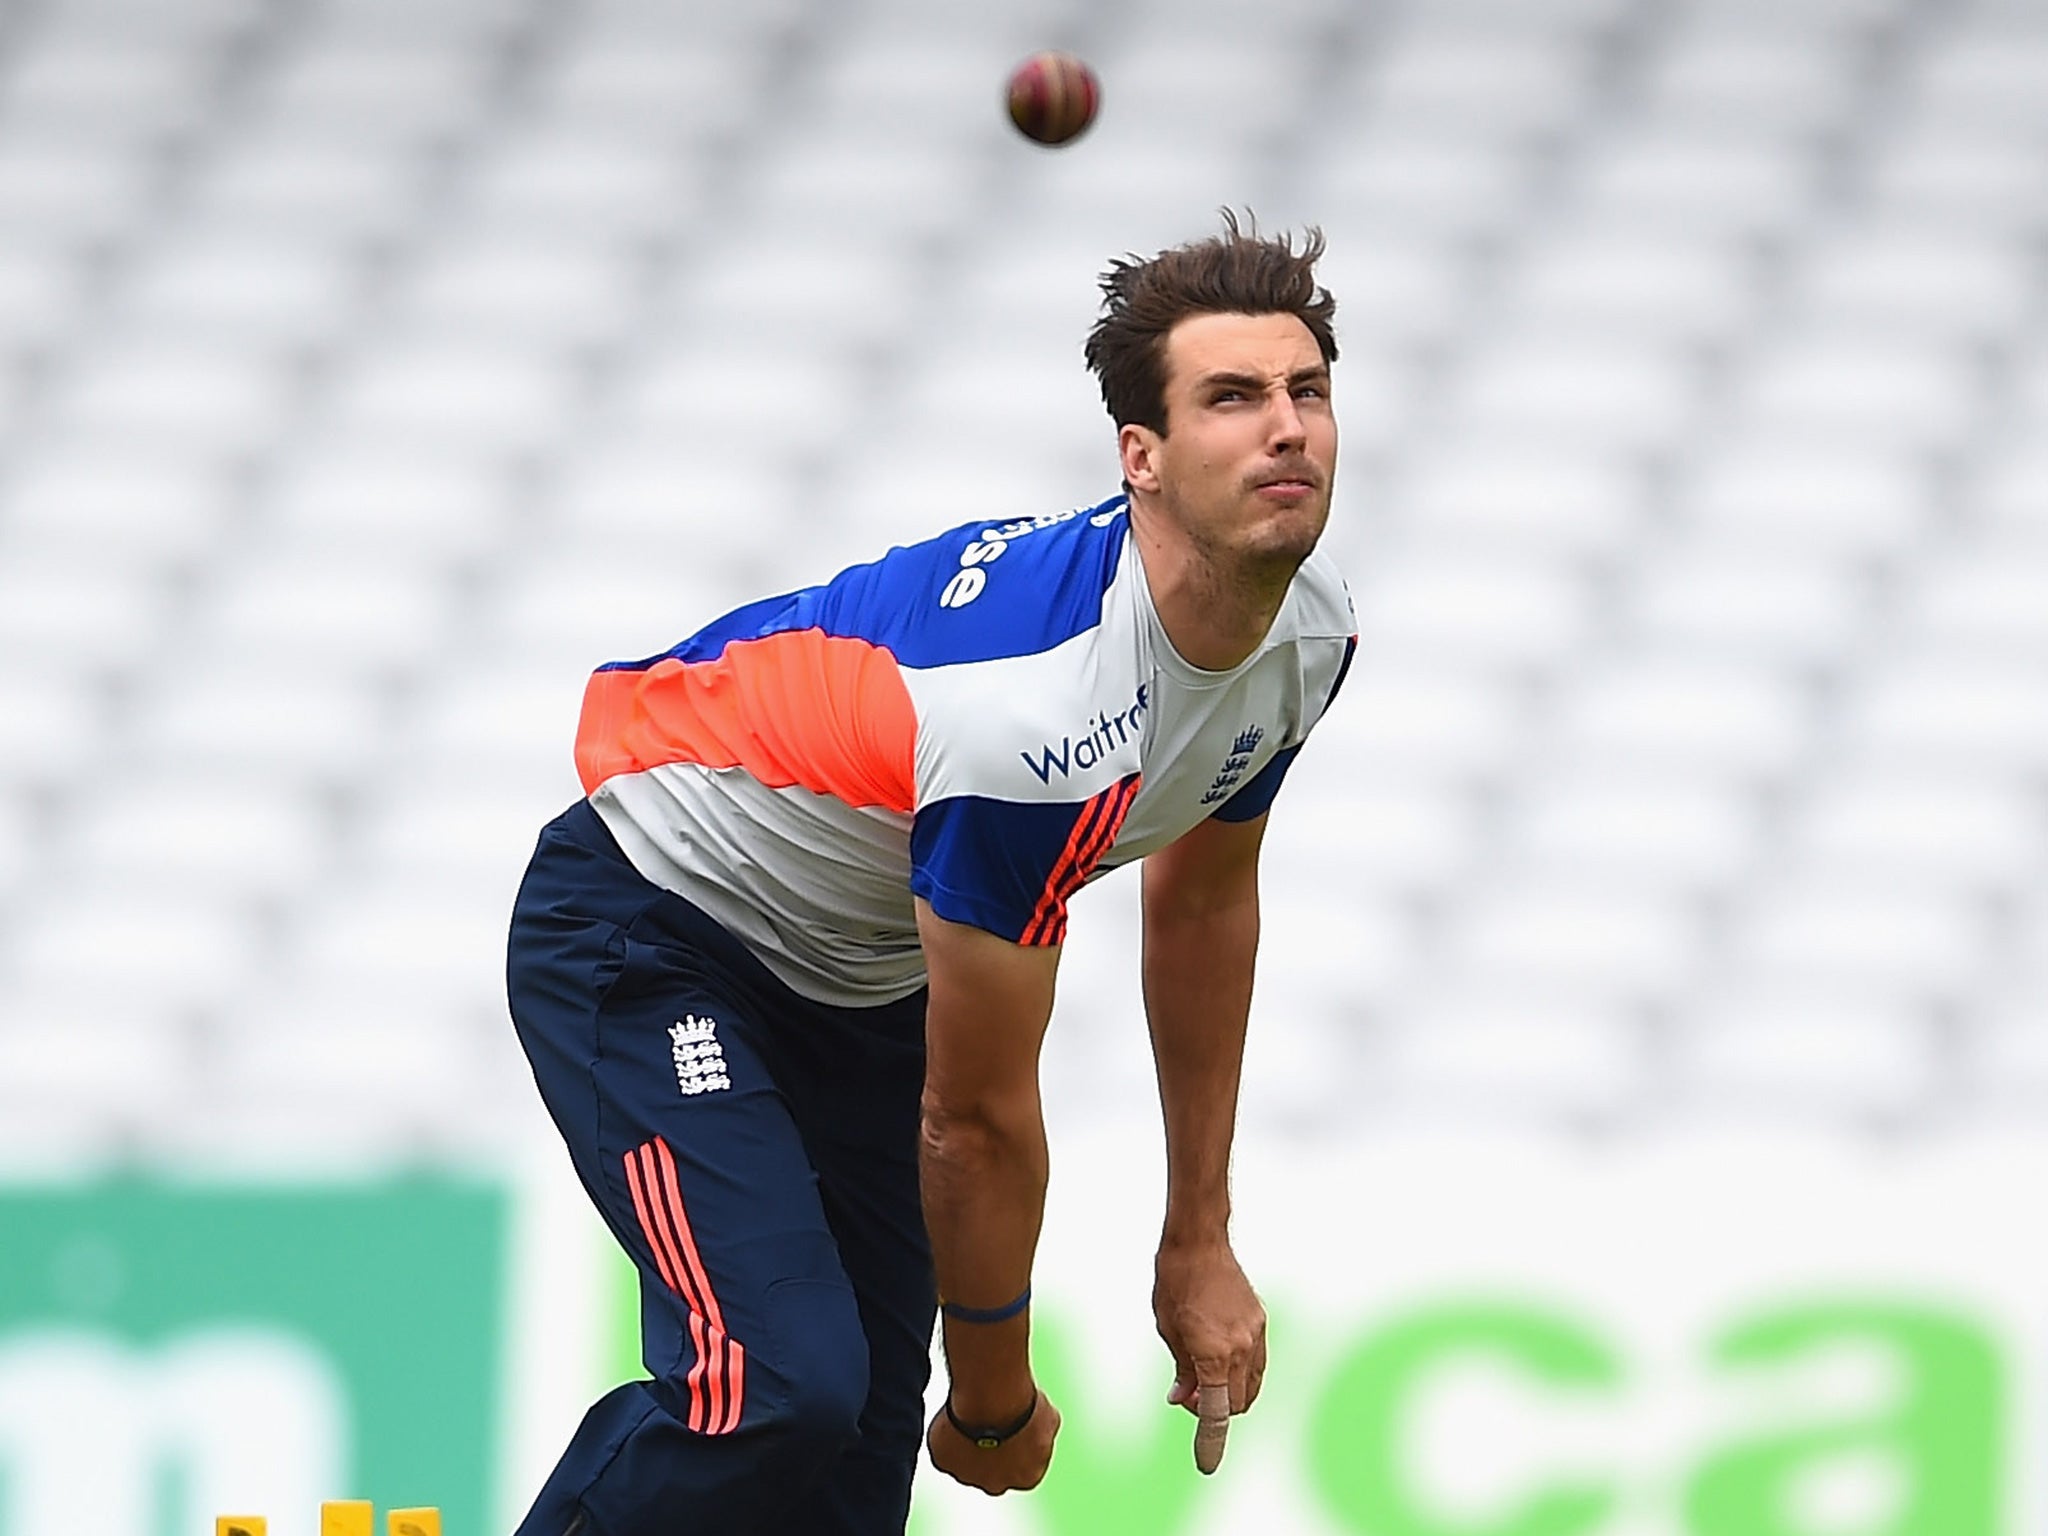 Steven Finn has been working hard to recover from a stress injury to his left foot